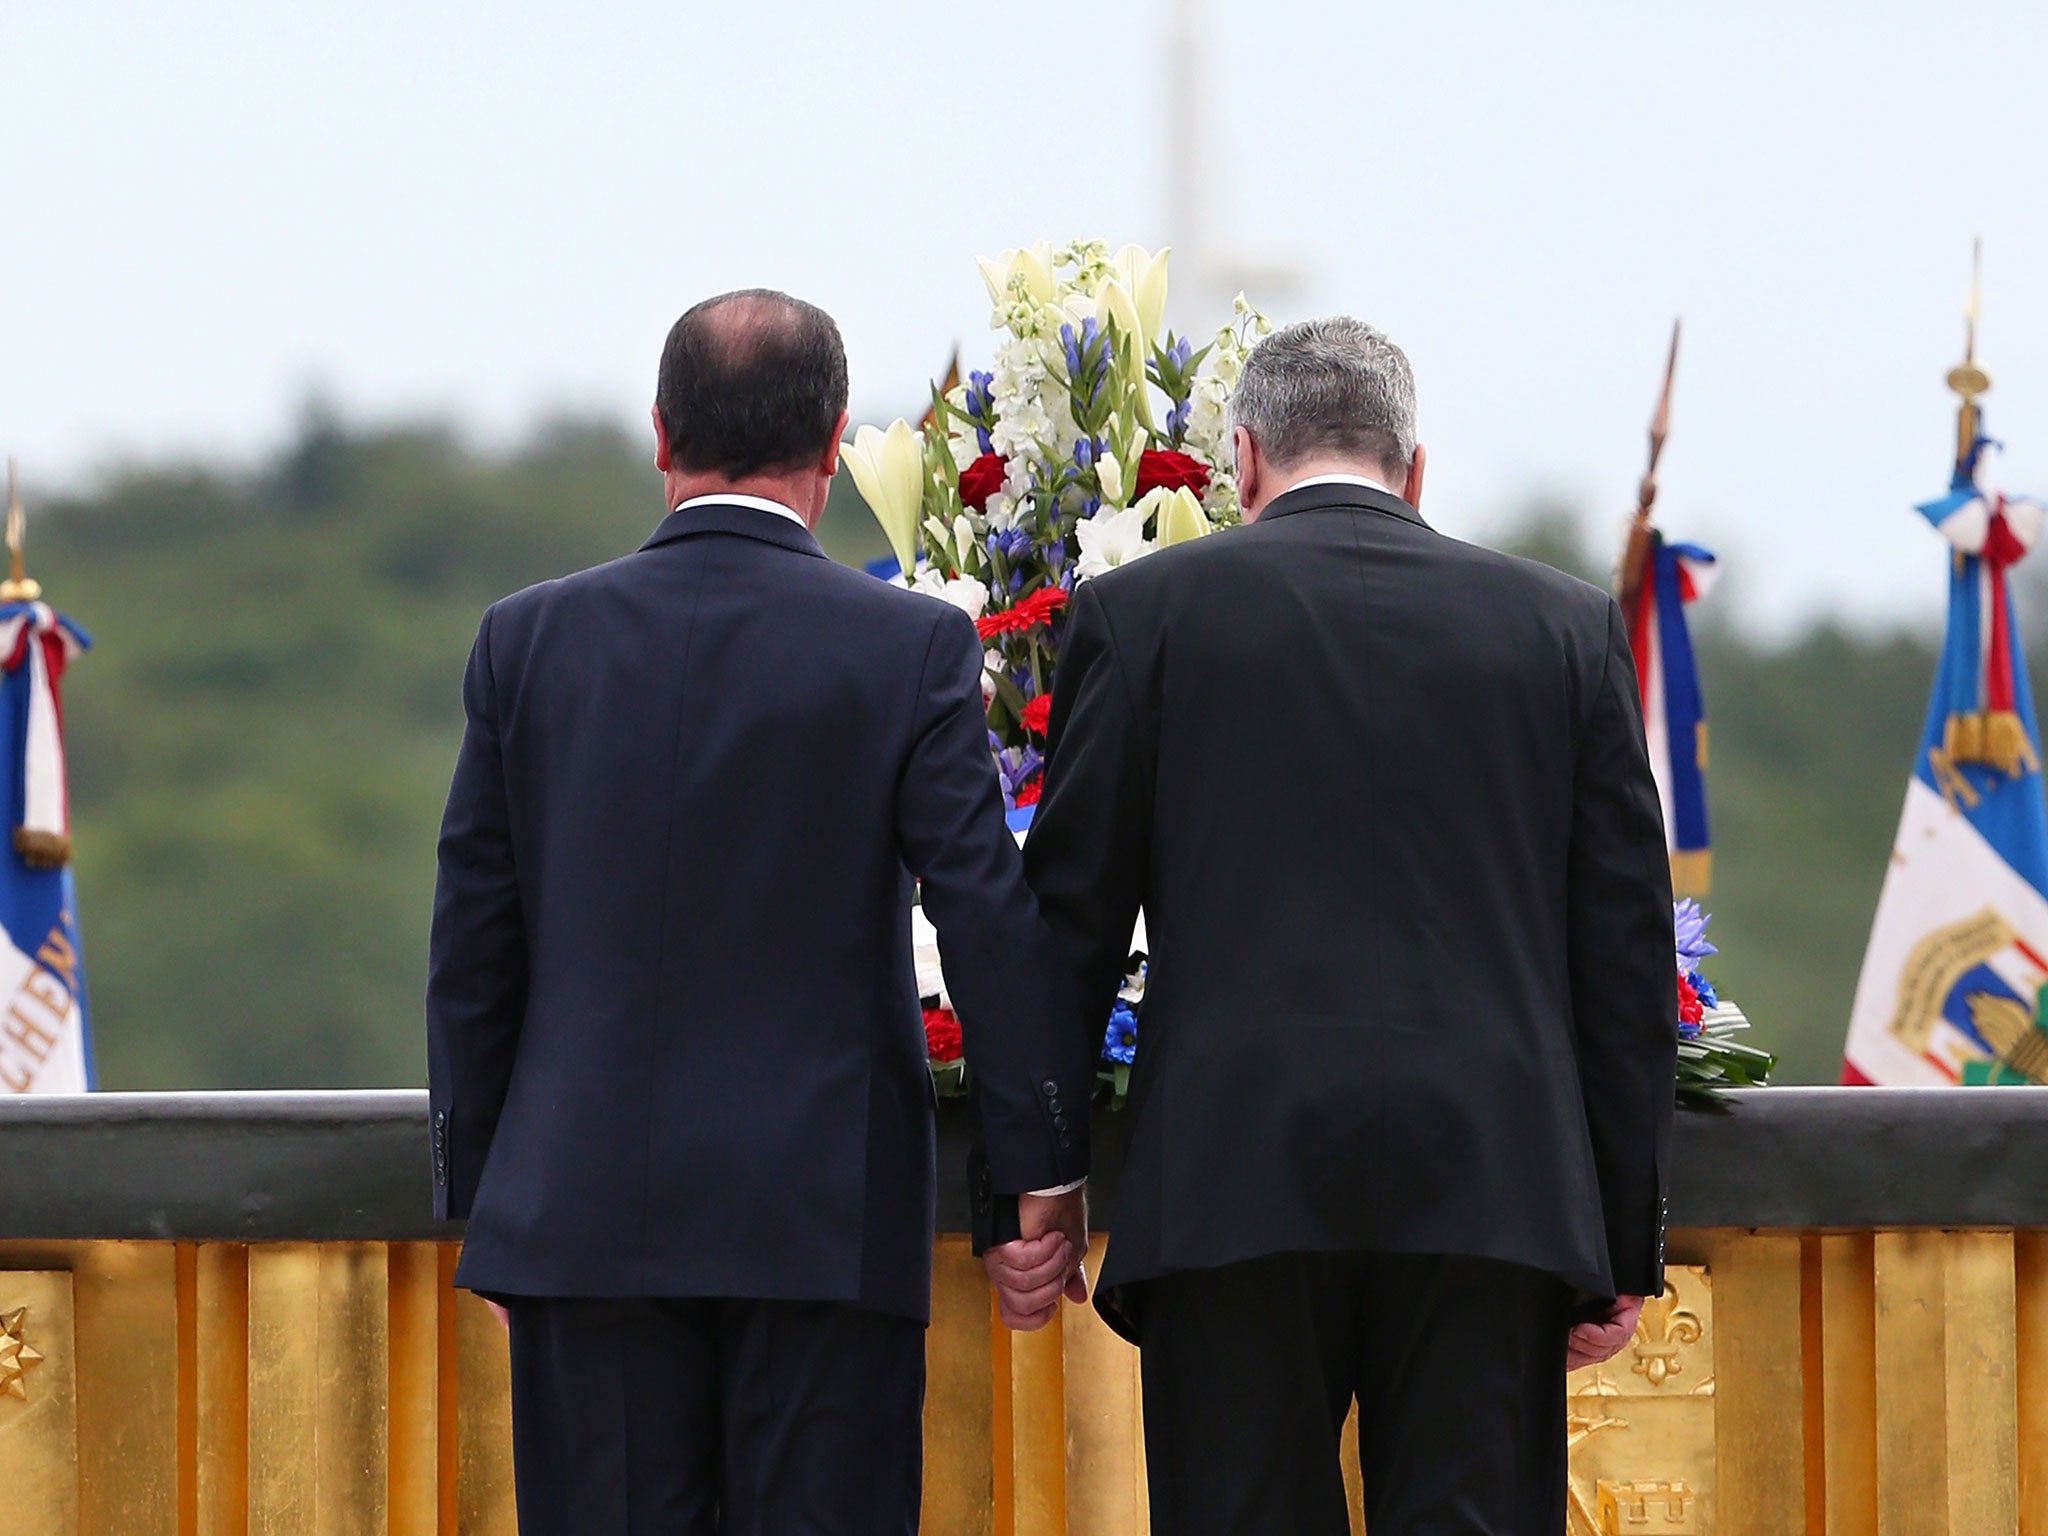 France’s President François Hollande, left, and German President Joachim Gauck pay their respects at the National Monument in Wattwiller, eastern France